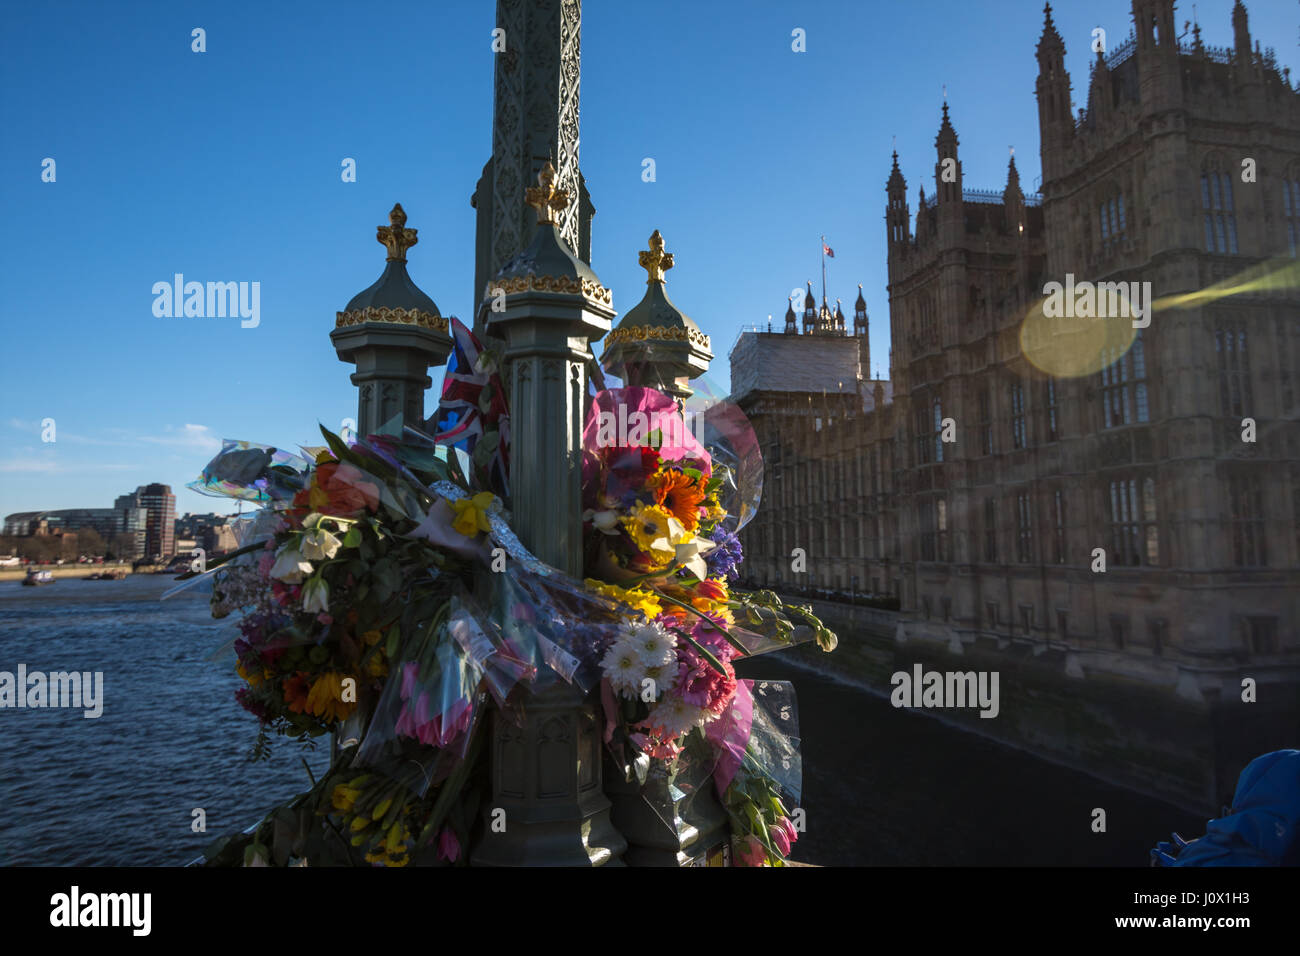 London, UK - March 25, 2017: Flower tributes for the victims of the March 22 terrorist attack at westminster bridge and british parliament Stock Photo